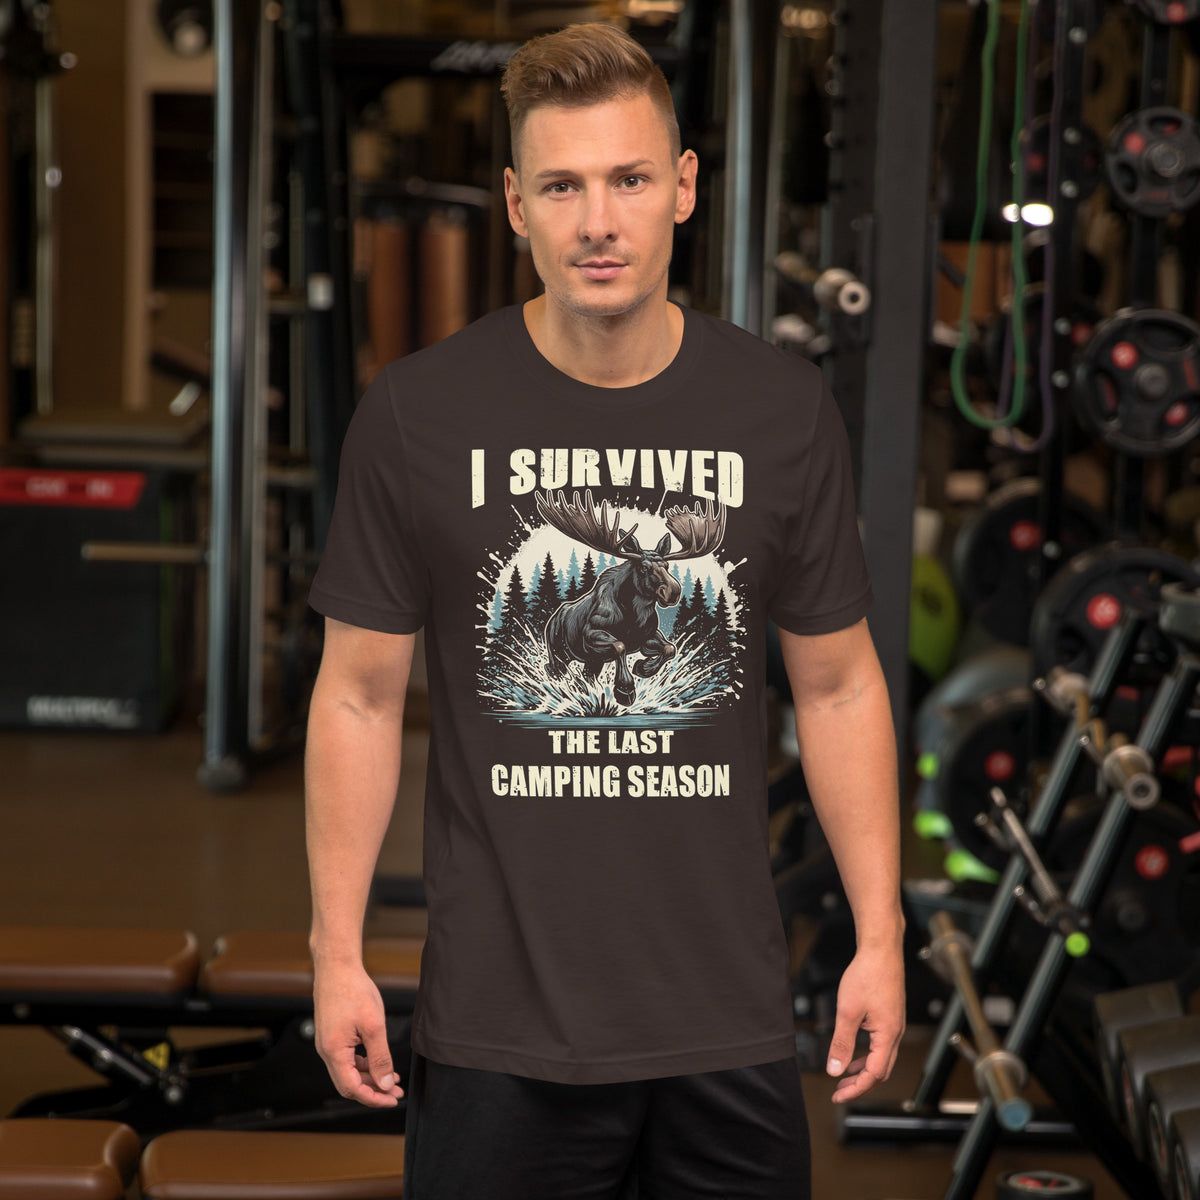 Cooles Herren Spruch Shirt "I Survived the Last Camping Season"